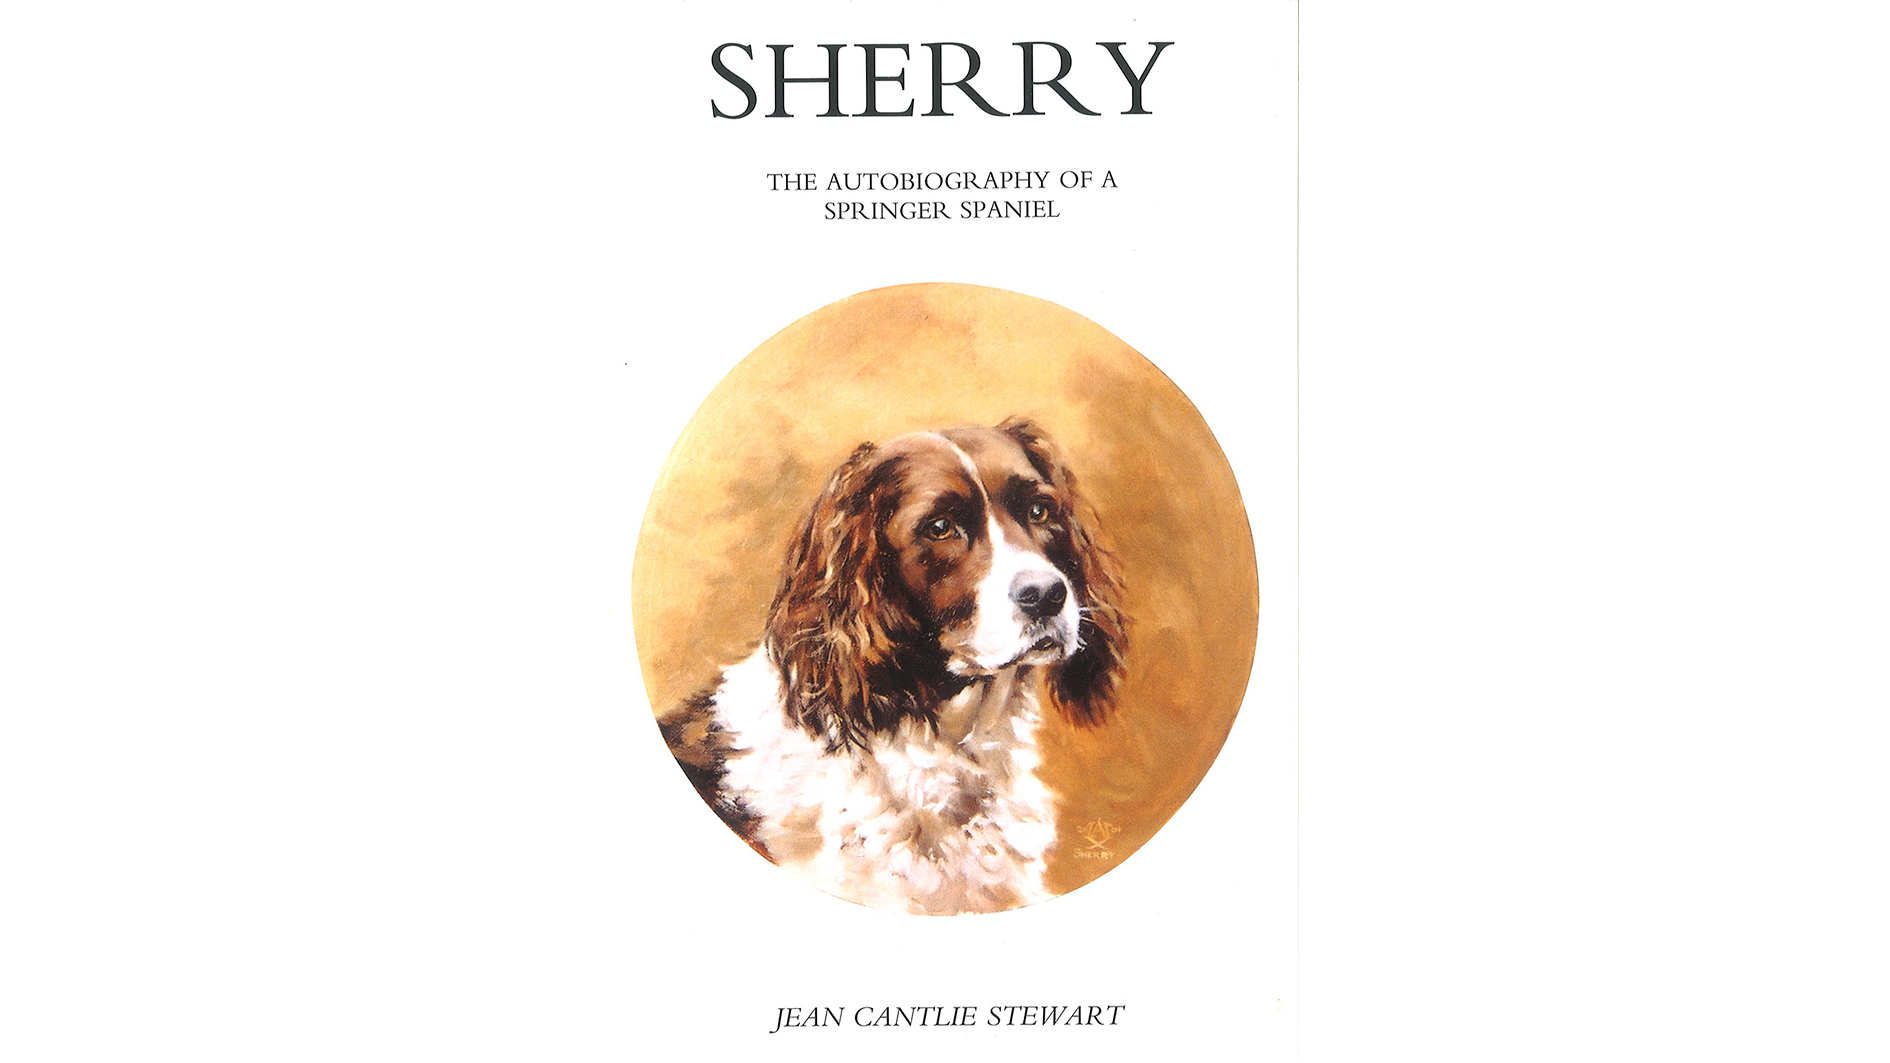 Sherry The Autobiography of a Springer Spaniel